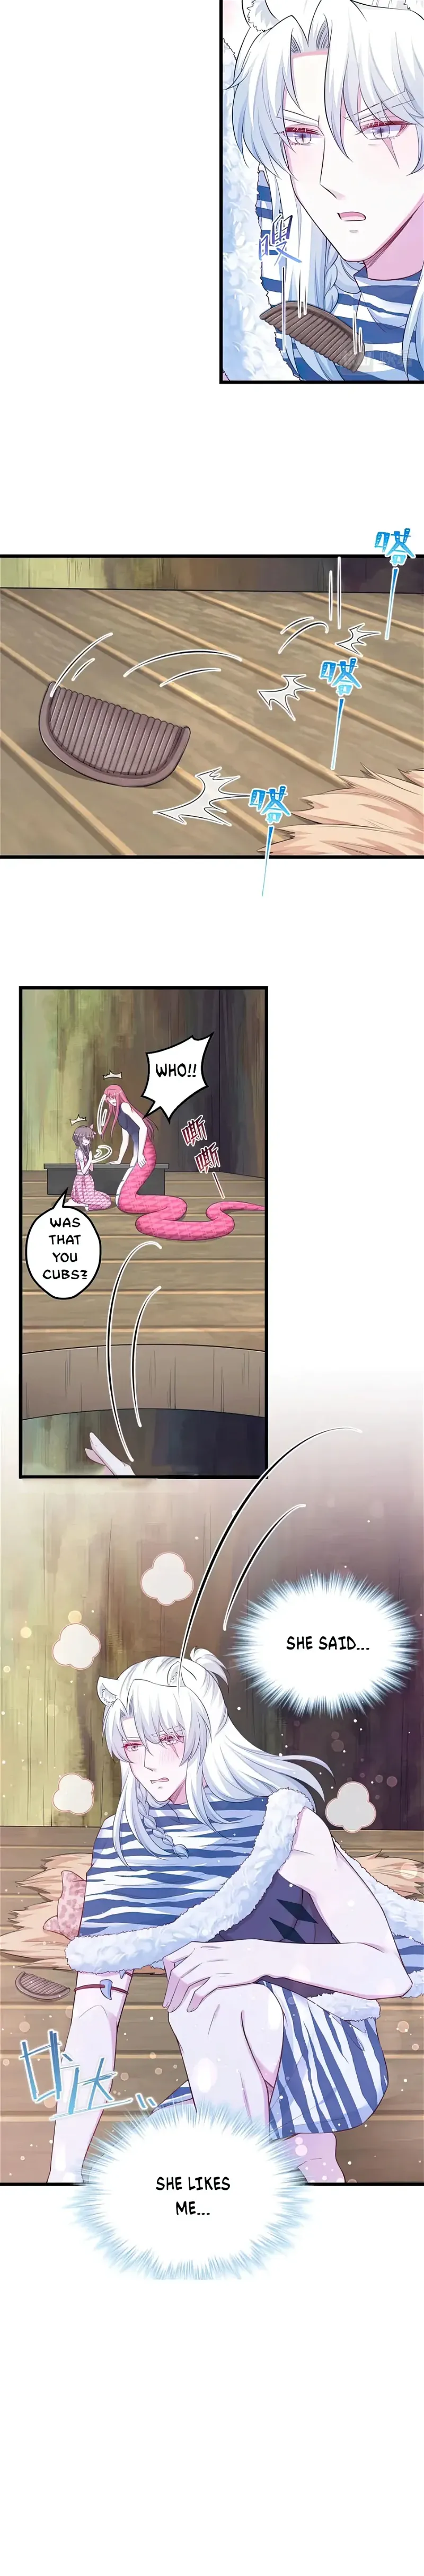 Beauty and the Beasts Chapter 394 page 10